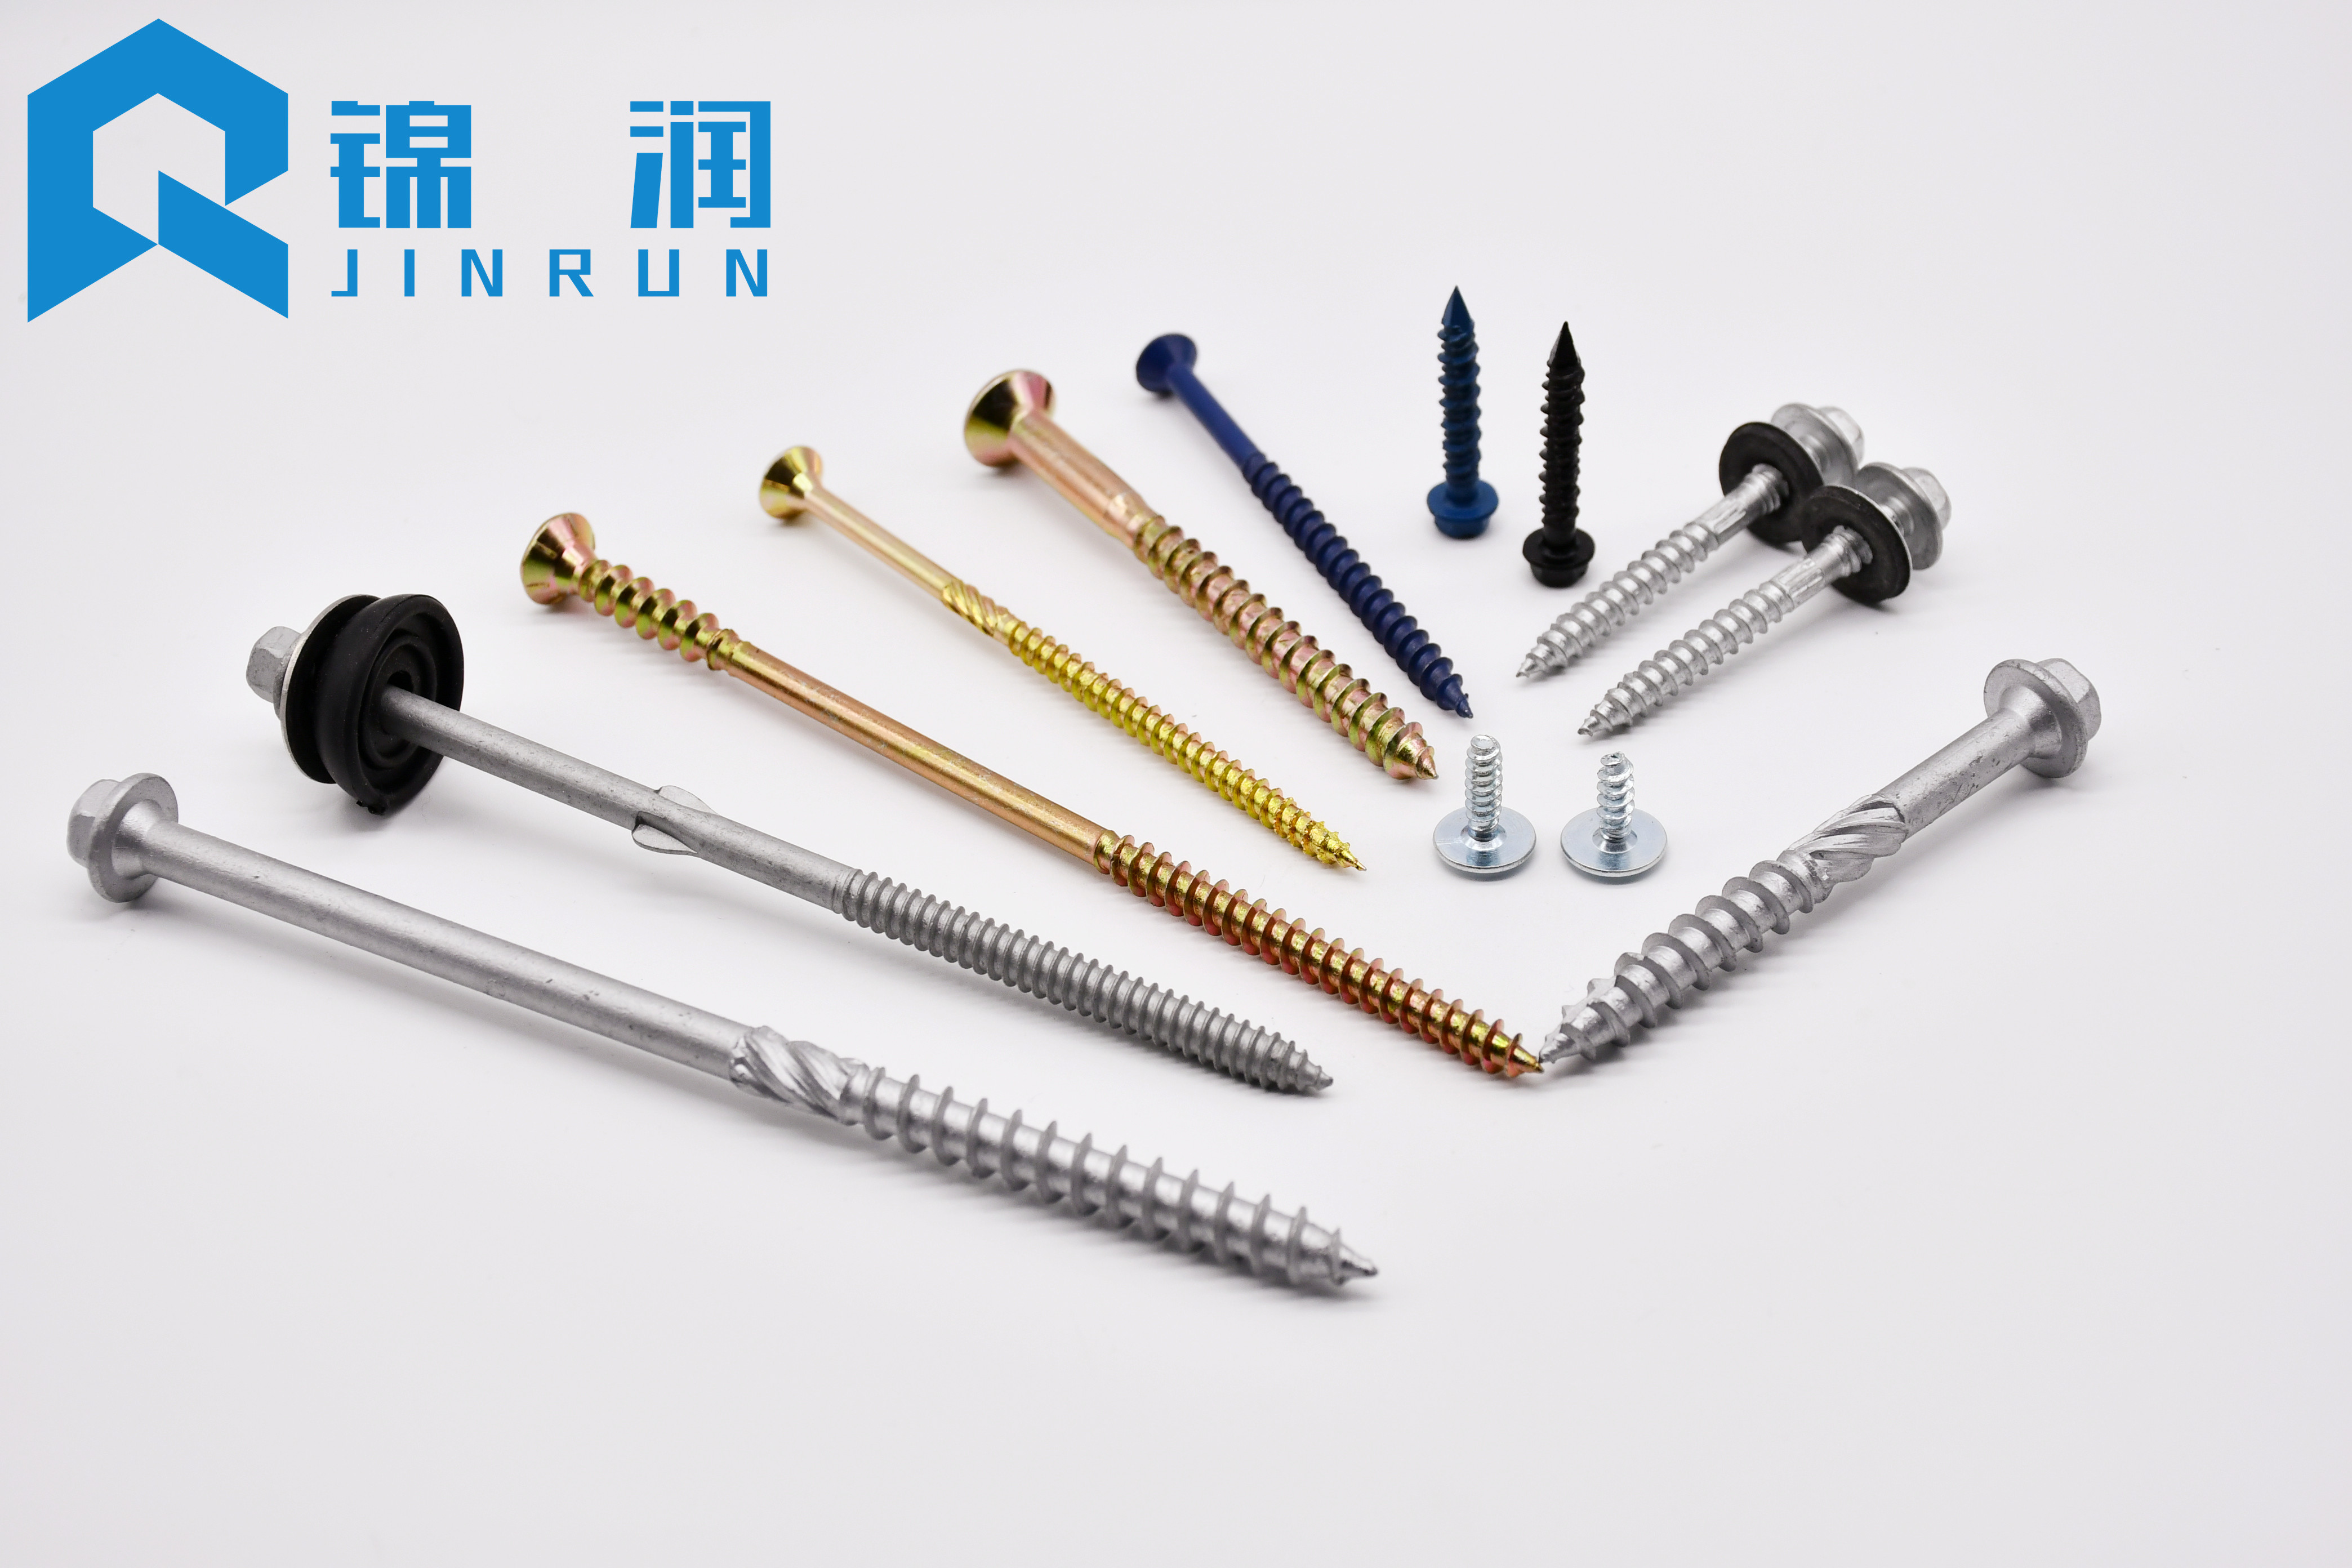 Types and functions of non-standard screws